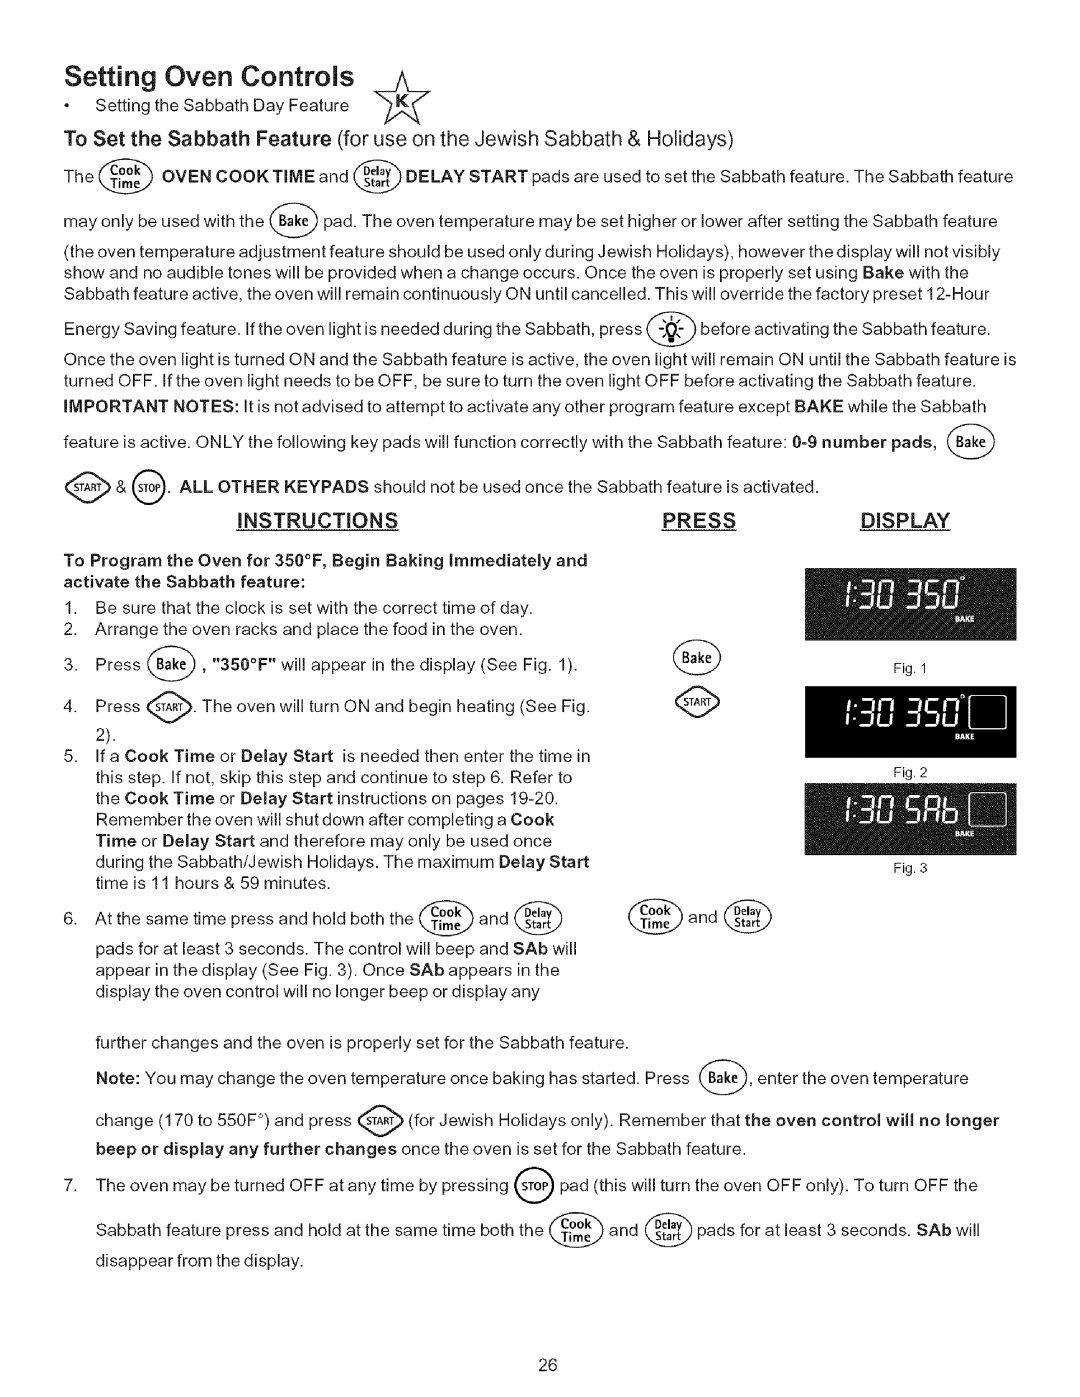 Kenmore 790.7943 manual Instructions, Press, Display, Setting theOvenSabbathControlsDay Feature 